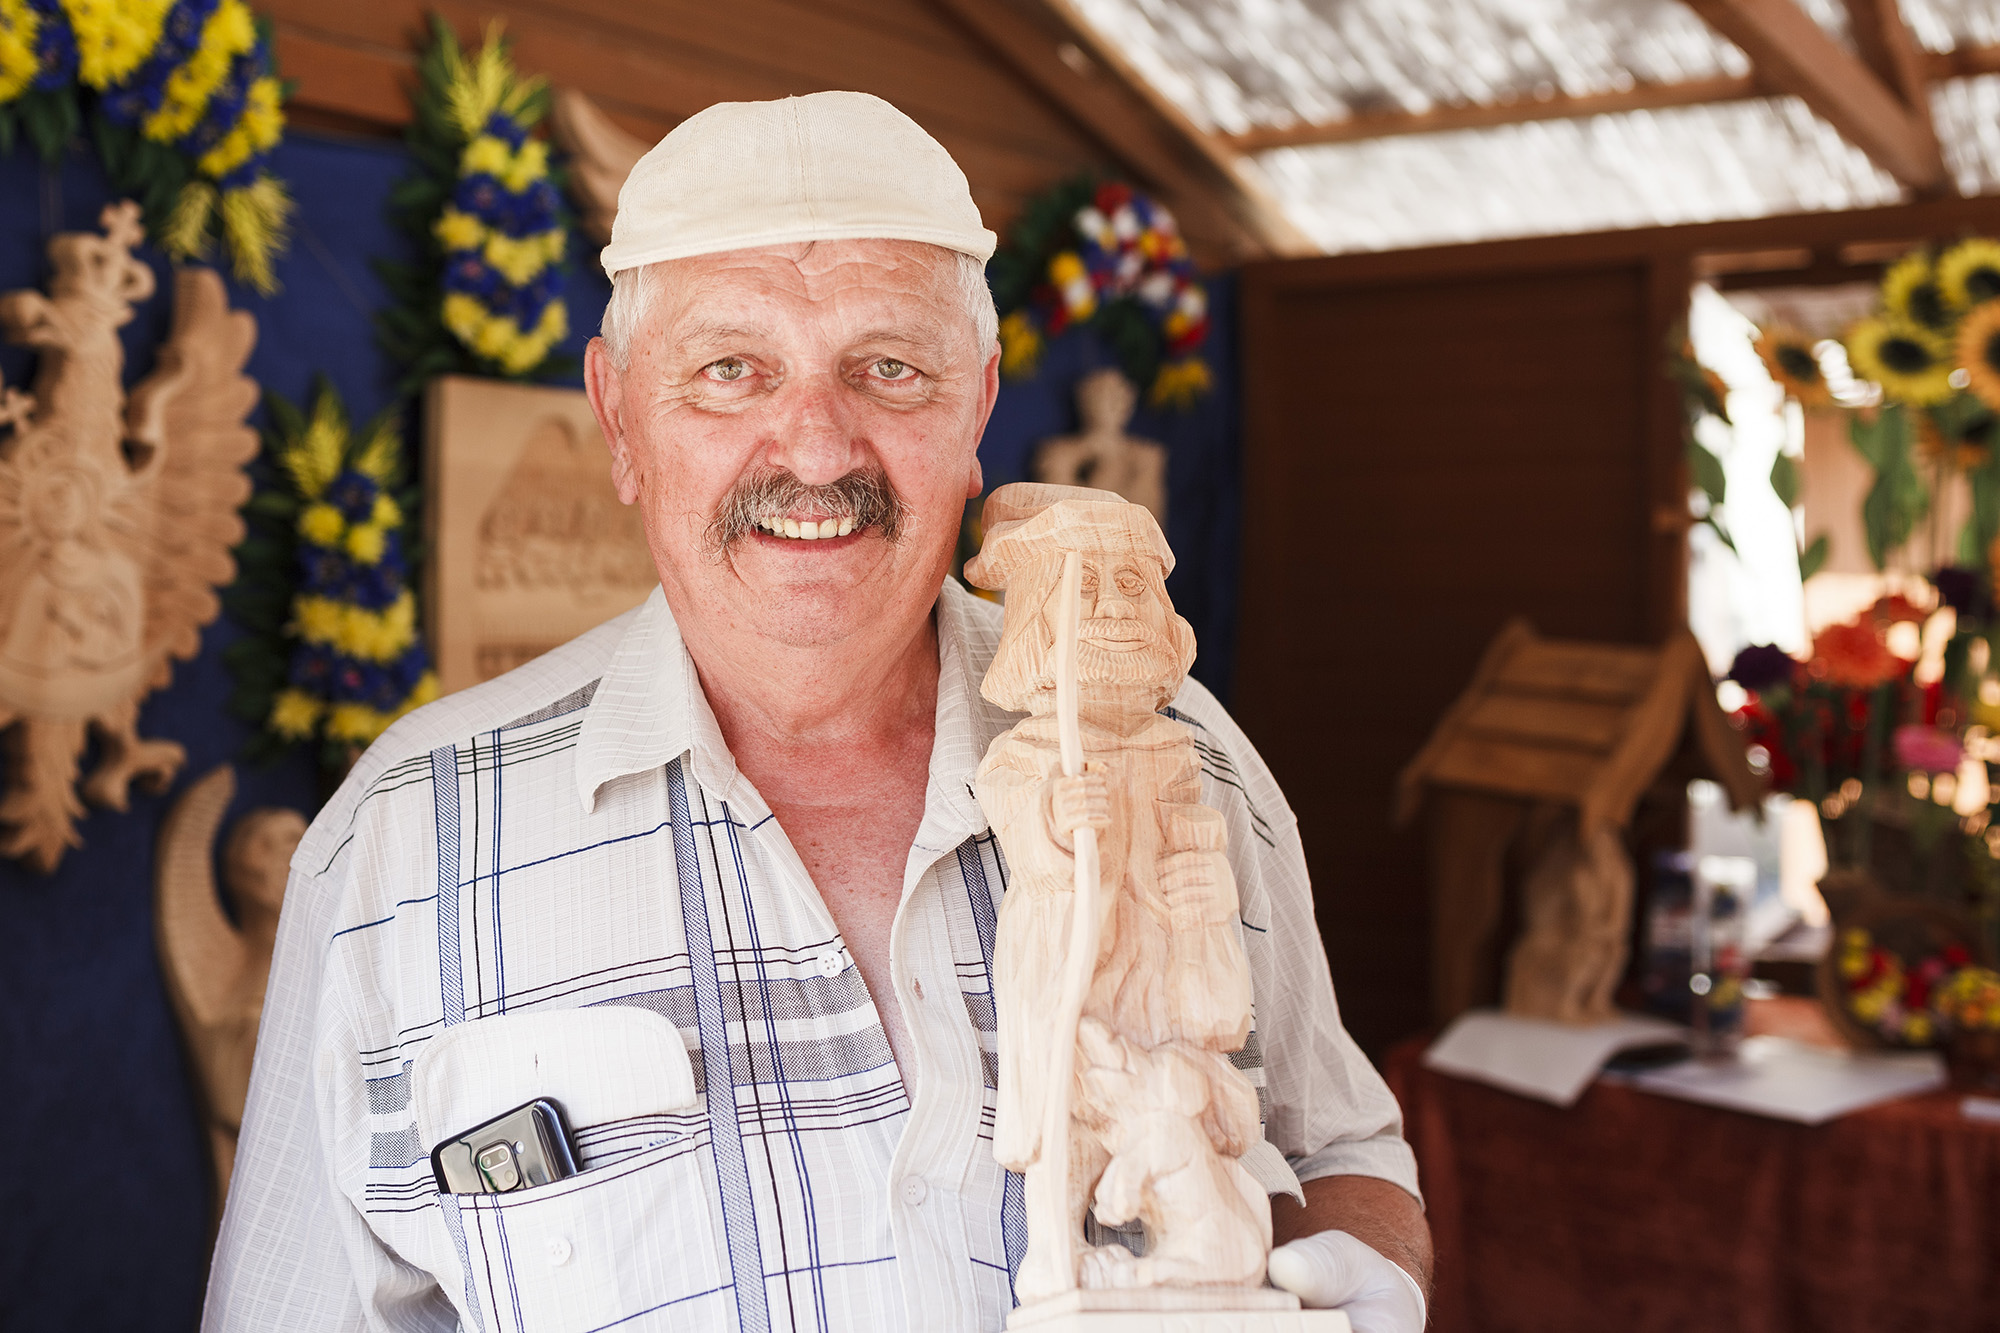 A smiling man in a checkered shirt is holding a wooden sculpture 